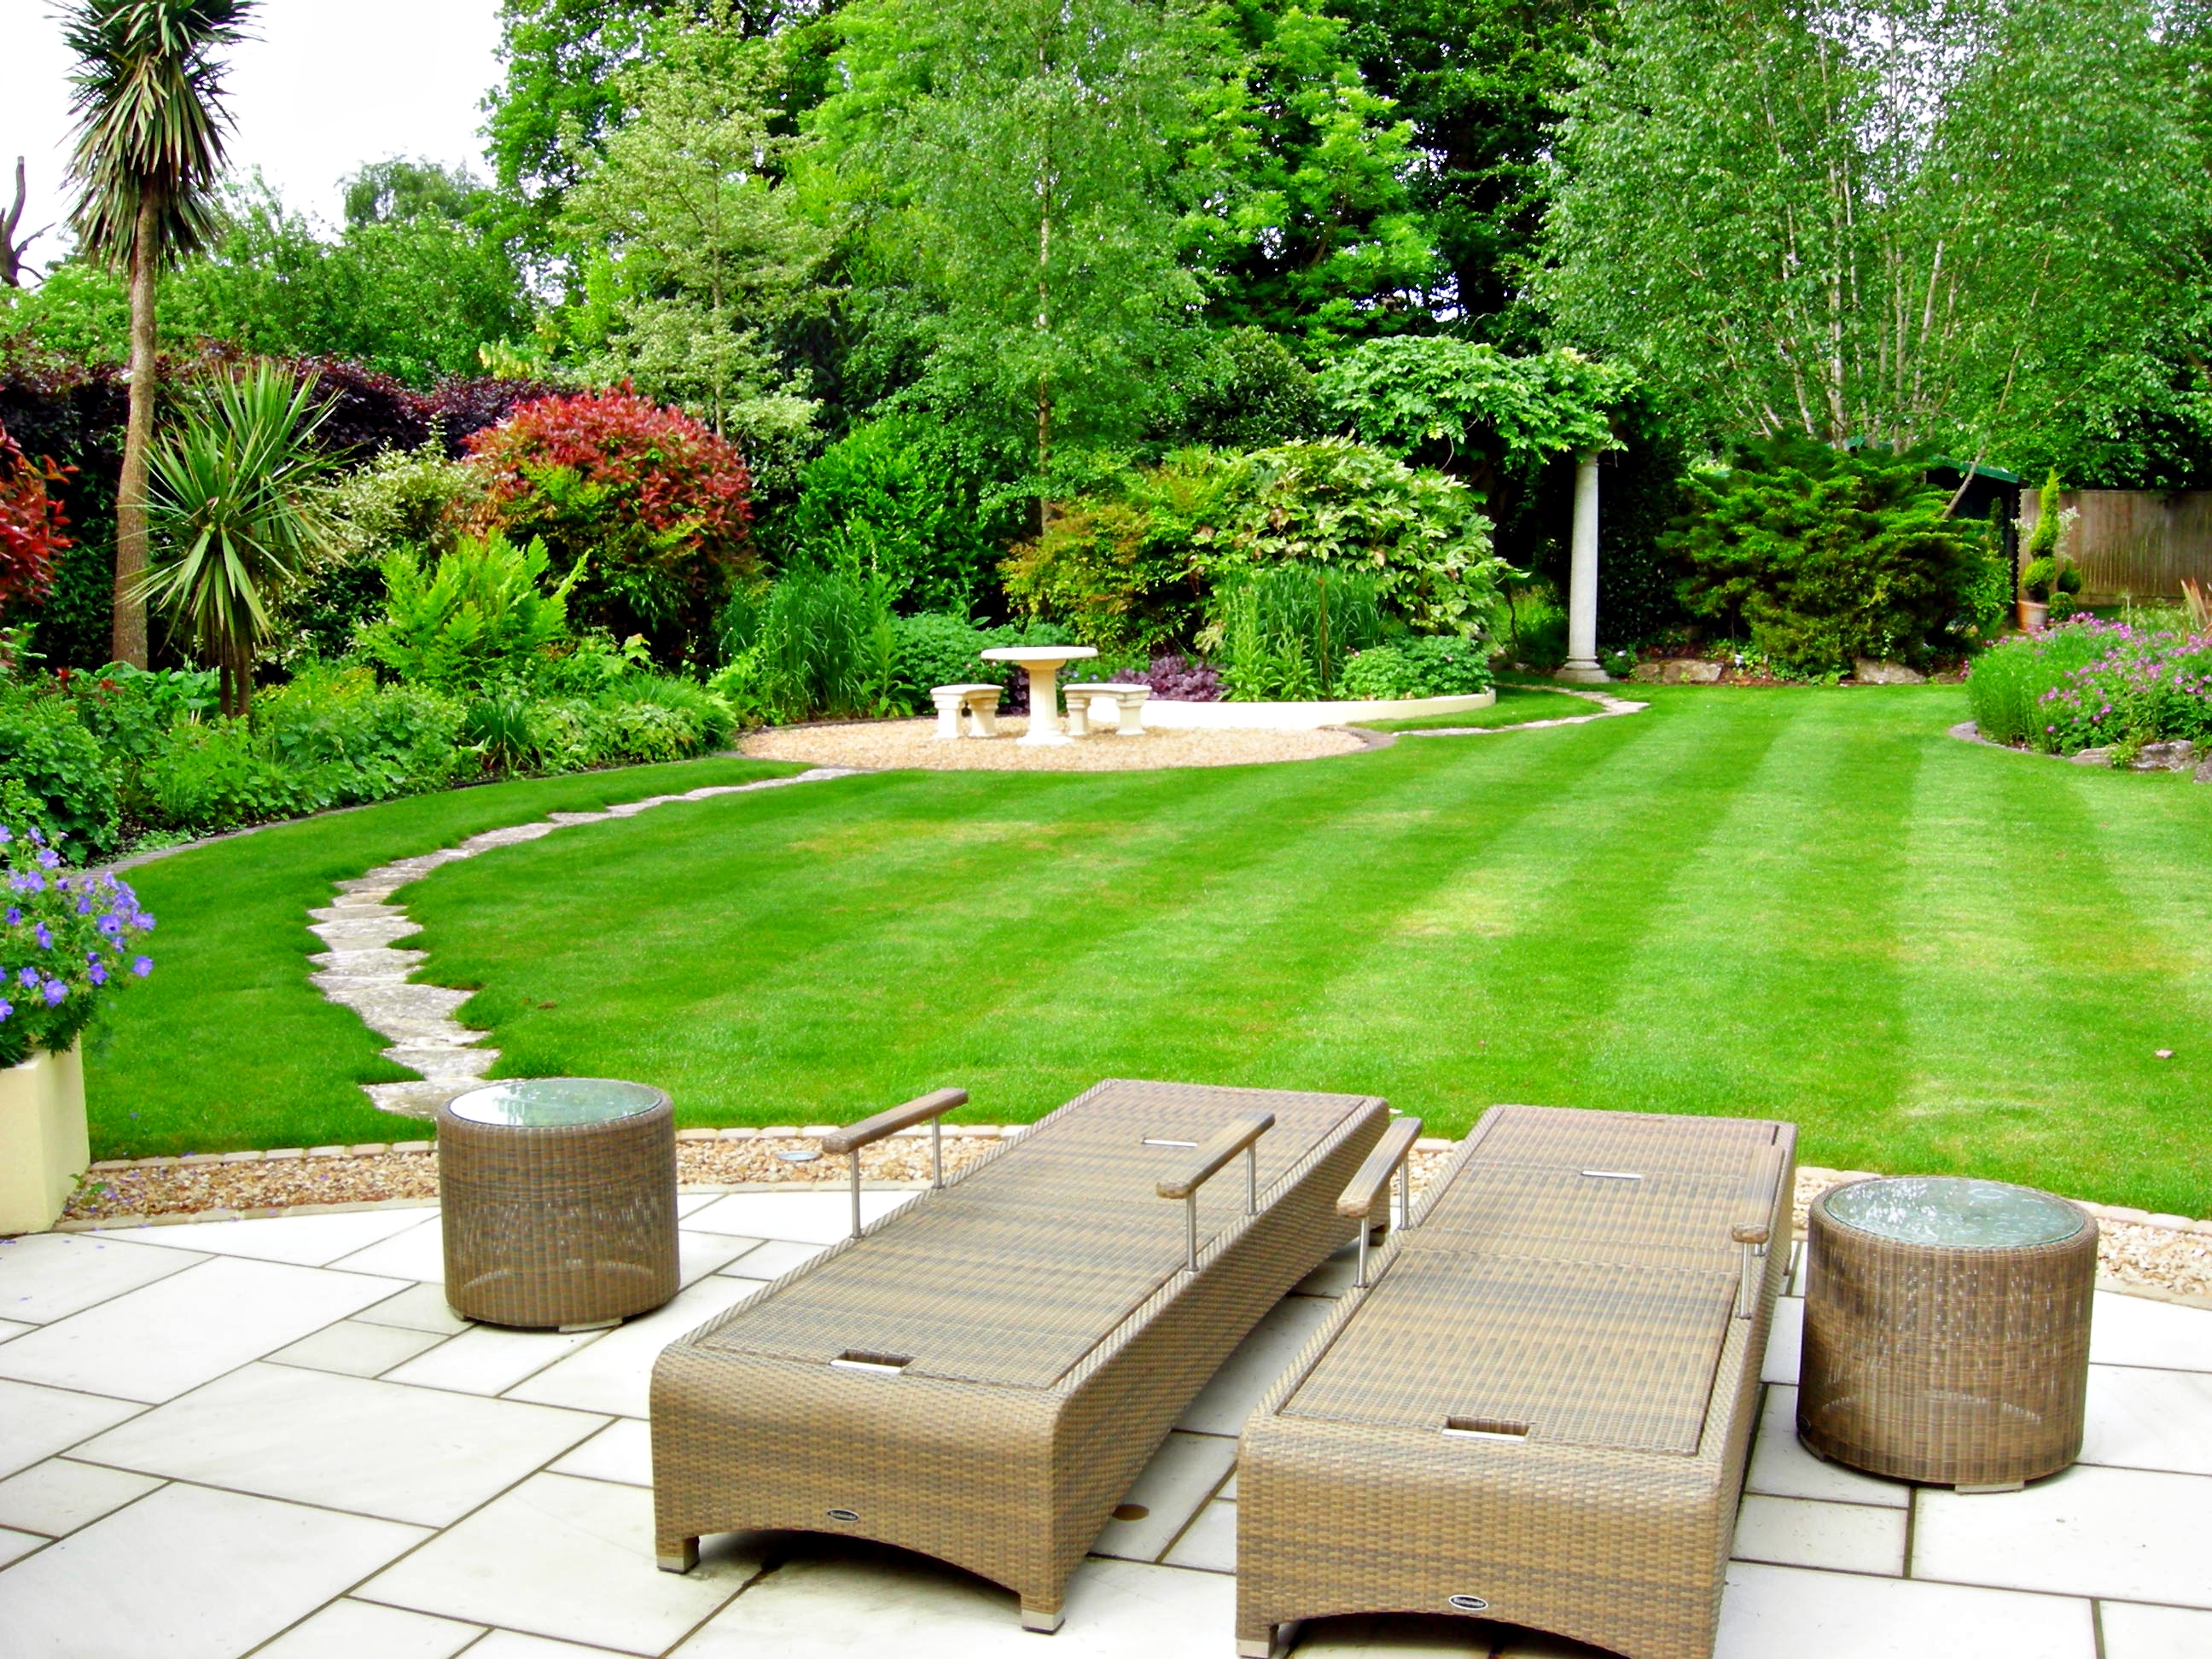 </p> <p>Find your ideal home design pro on designfor-me.com - get matched and see who's interested in your home project. Click image to see more inspiration from our design pros</p> <p>Design by Dru, garden designer from Bracknell Forest, South East</p> <p> #gardendesign #gardeninspiration #gardenlove #gardenideas #gardens </p> <p>